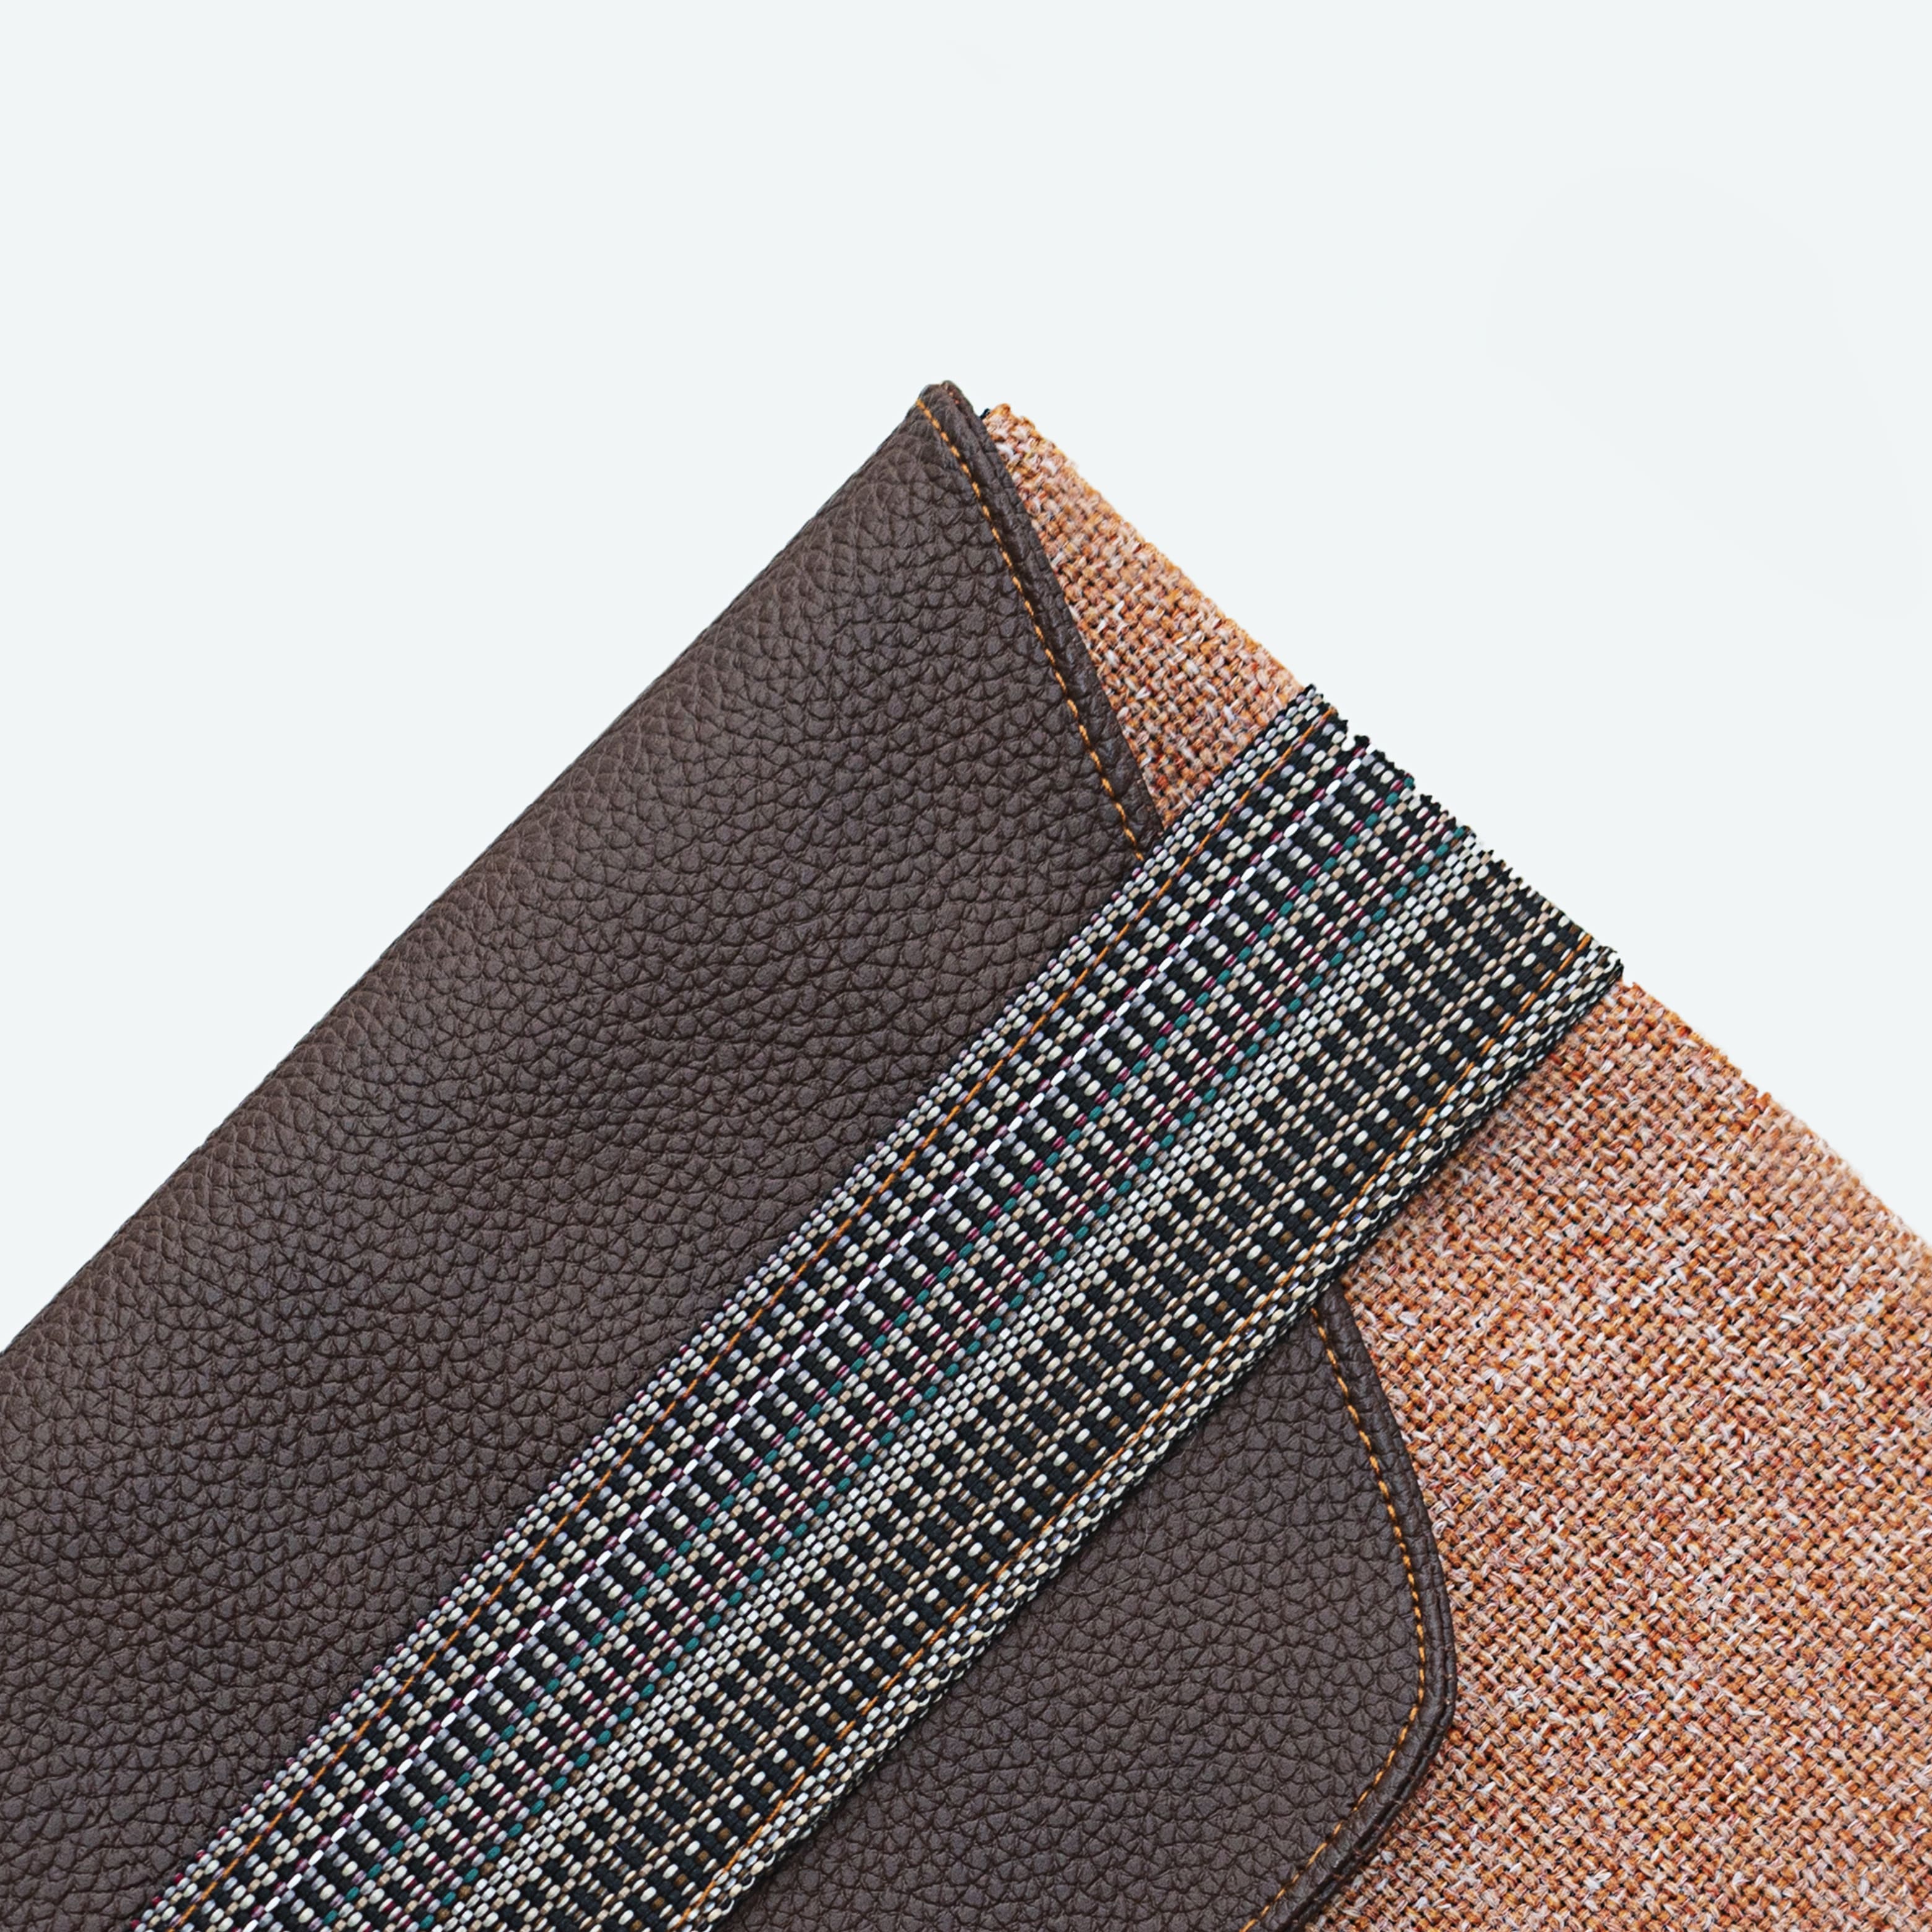 Pouch in shades of brown, leather and fabric